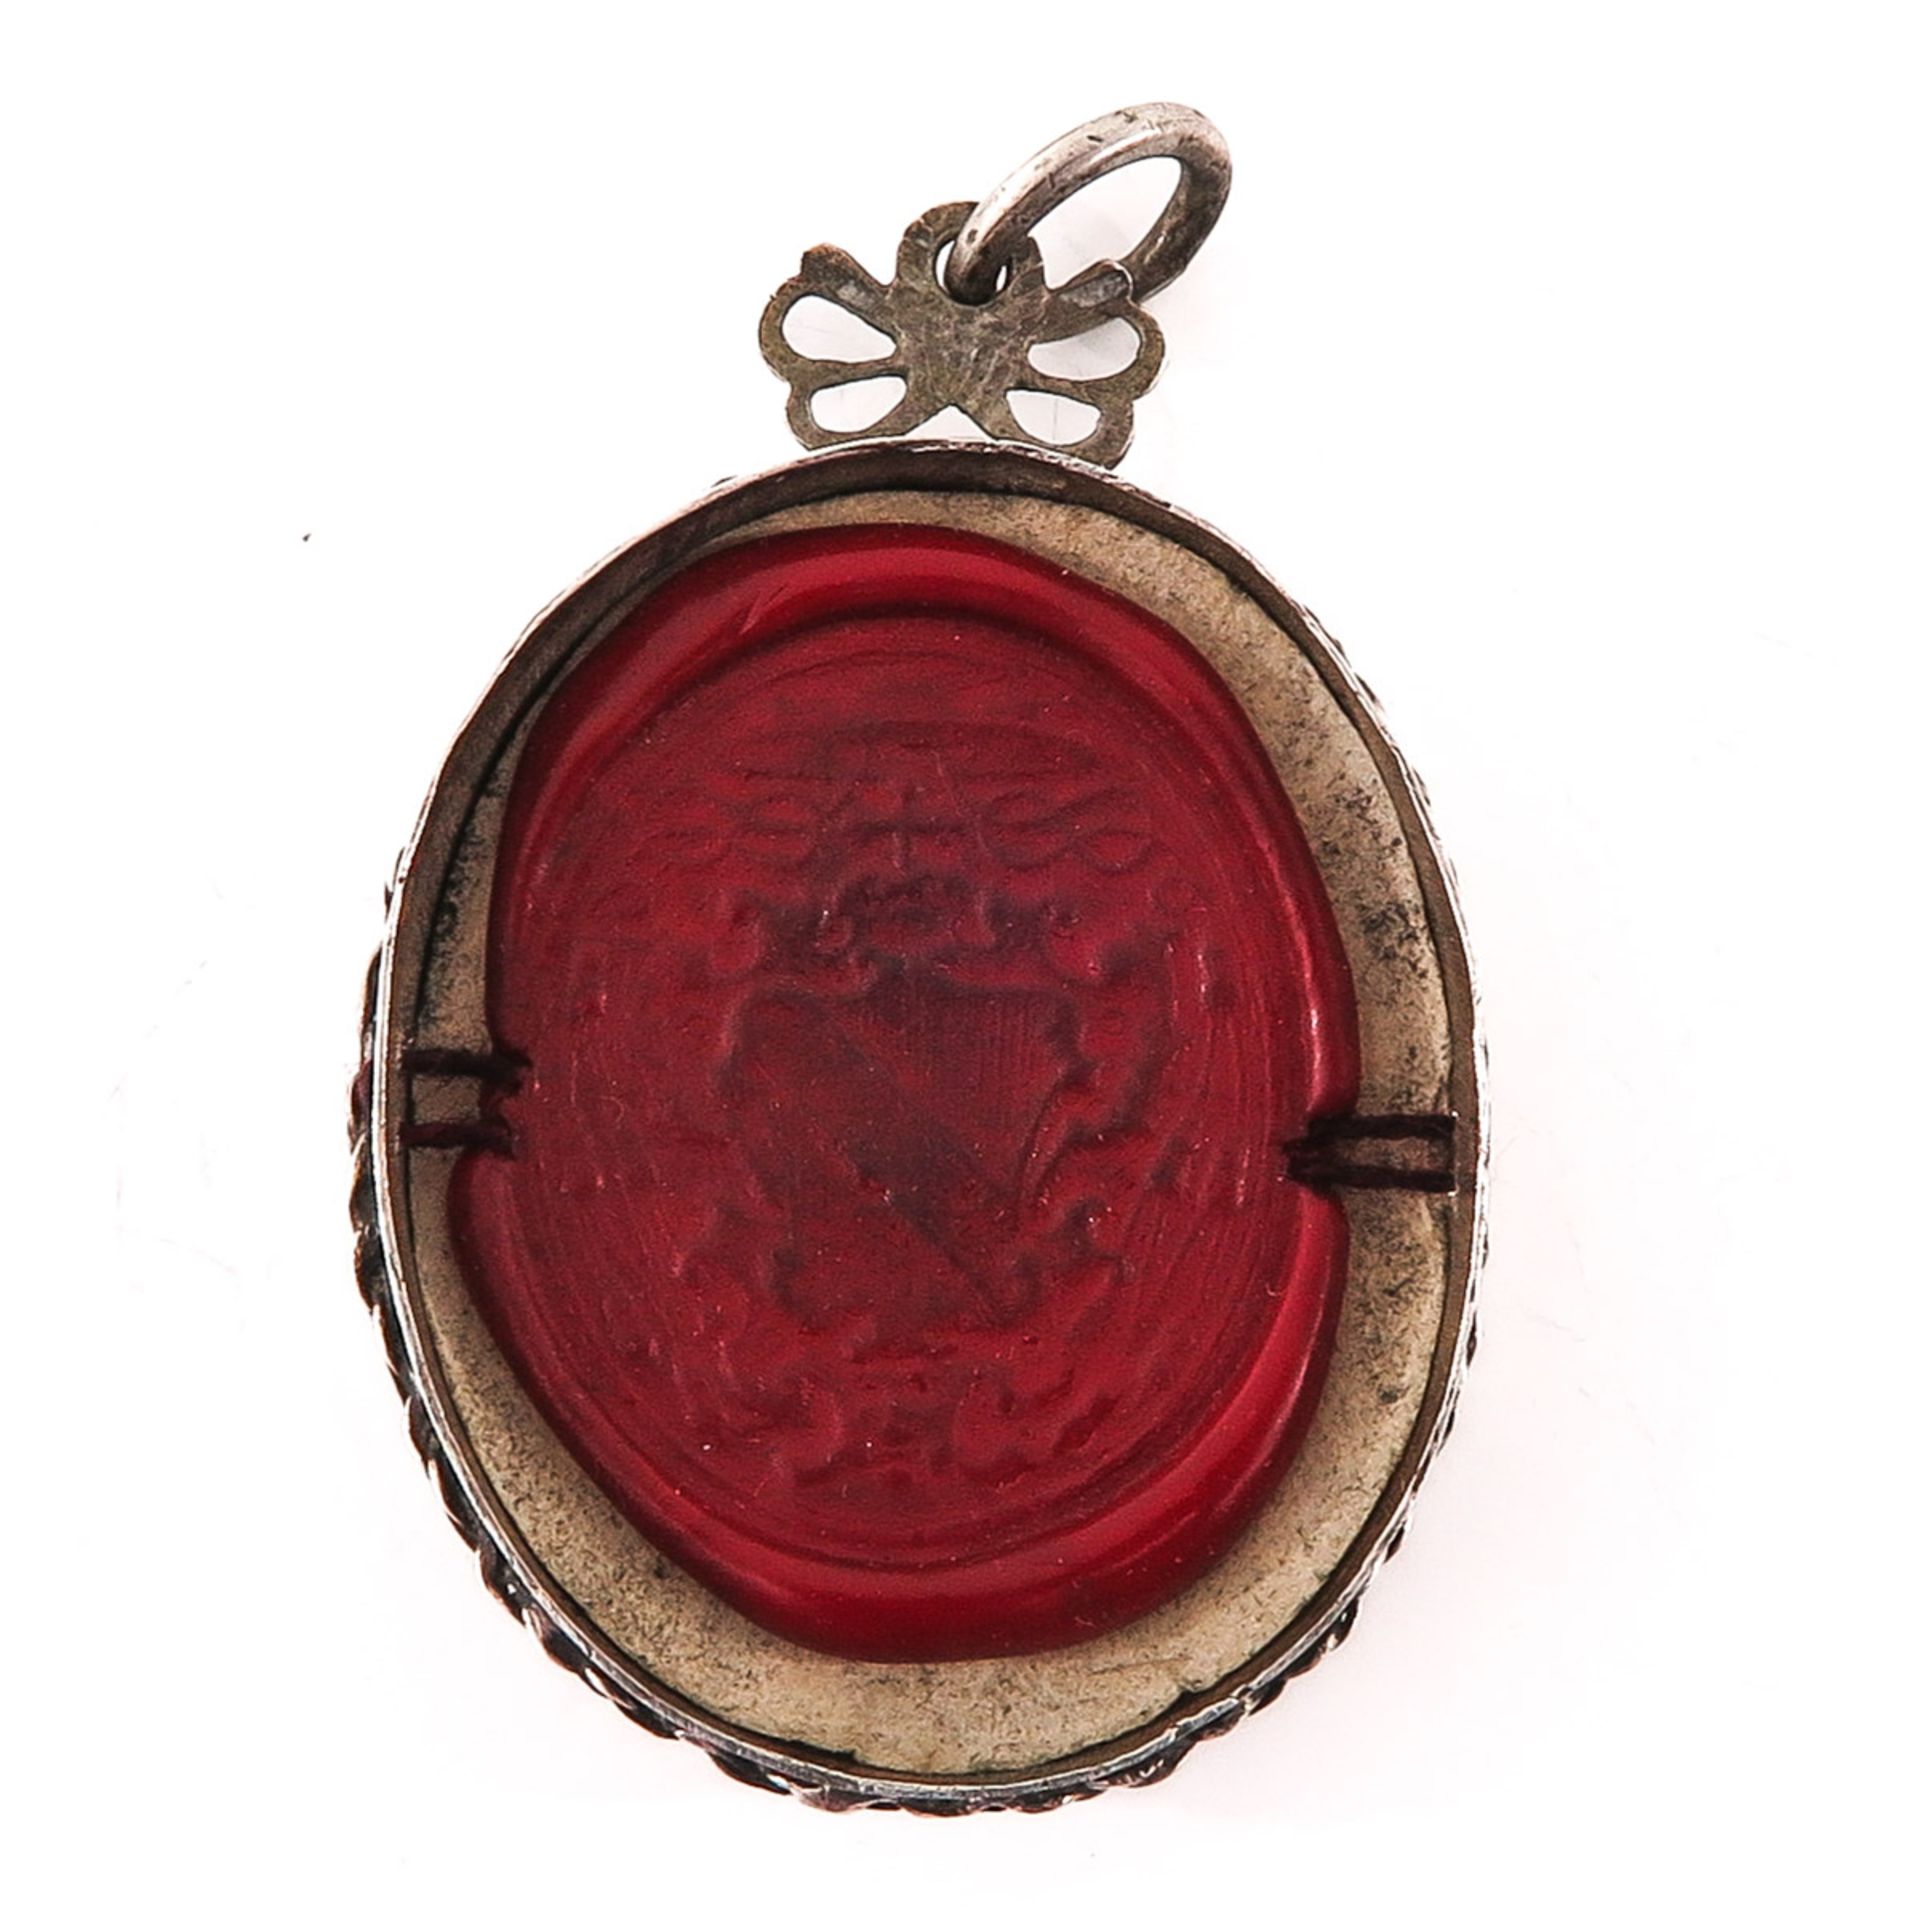 A Relic Pendant Holding 2 Relics - Image 2 of 7